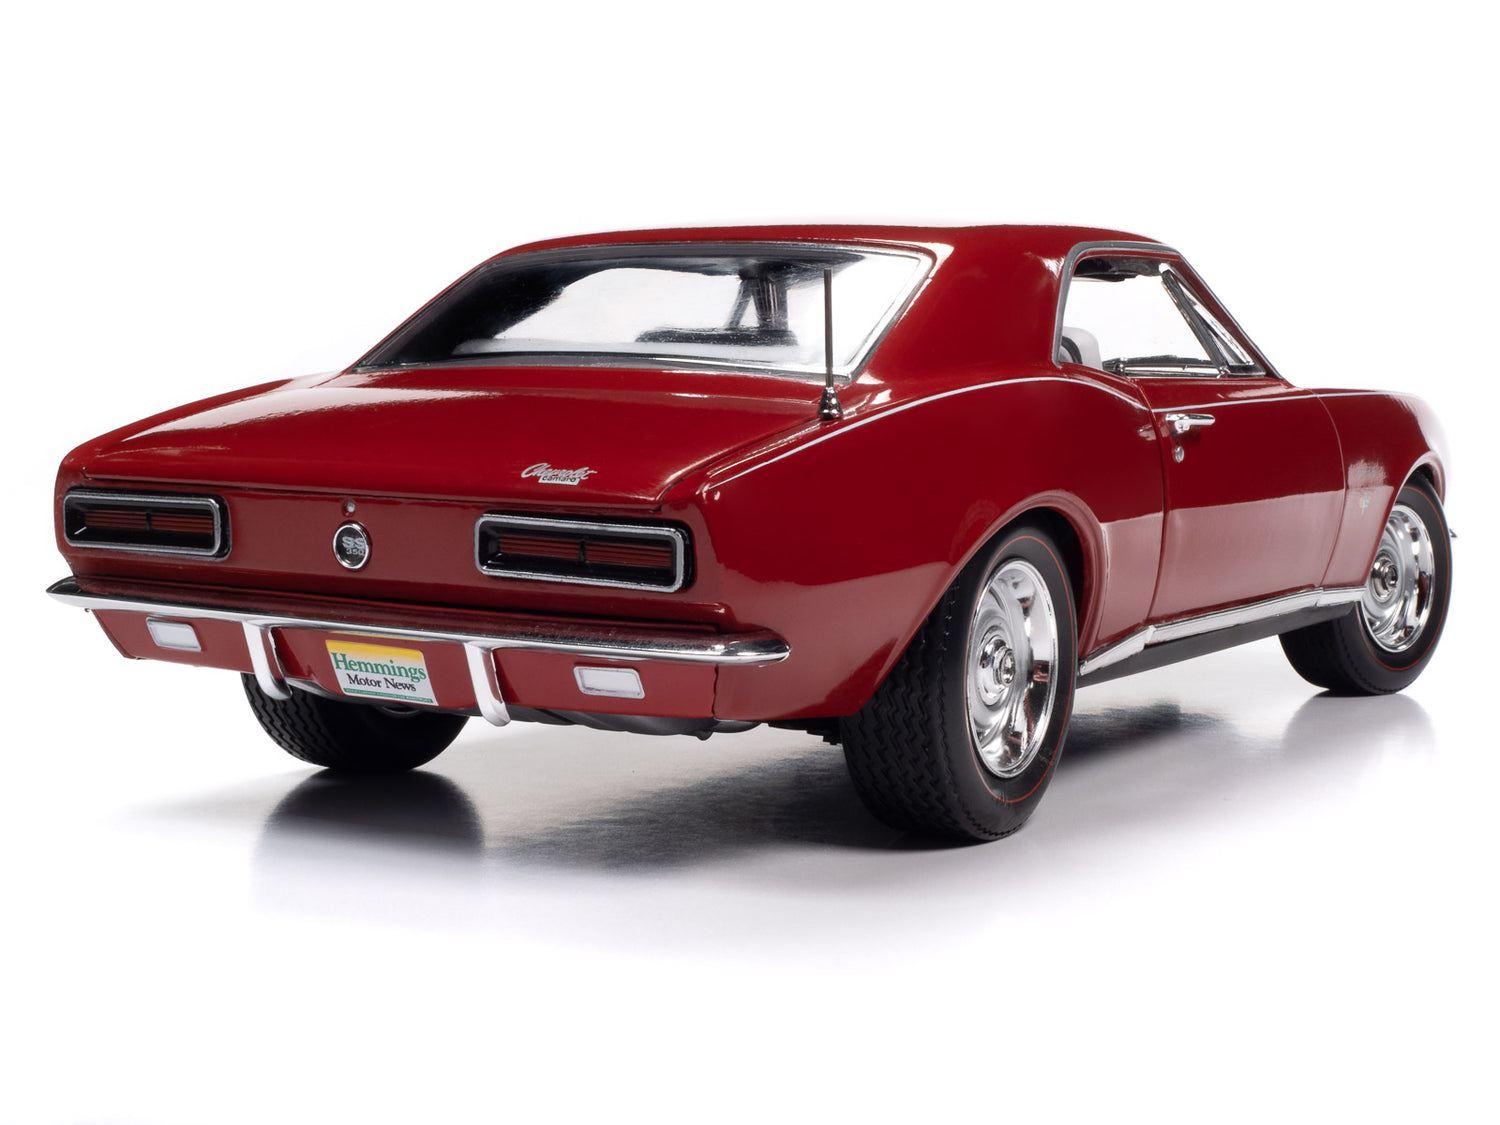 American Muscle 1967 Chevrolet Camaro RS/SS (Hemmings) 1:18 Scale Diecast